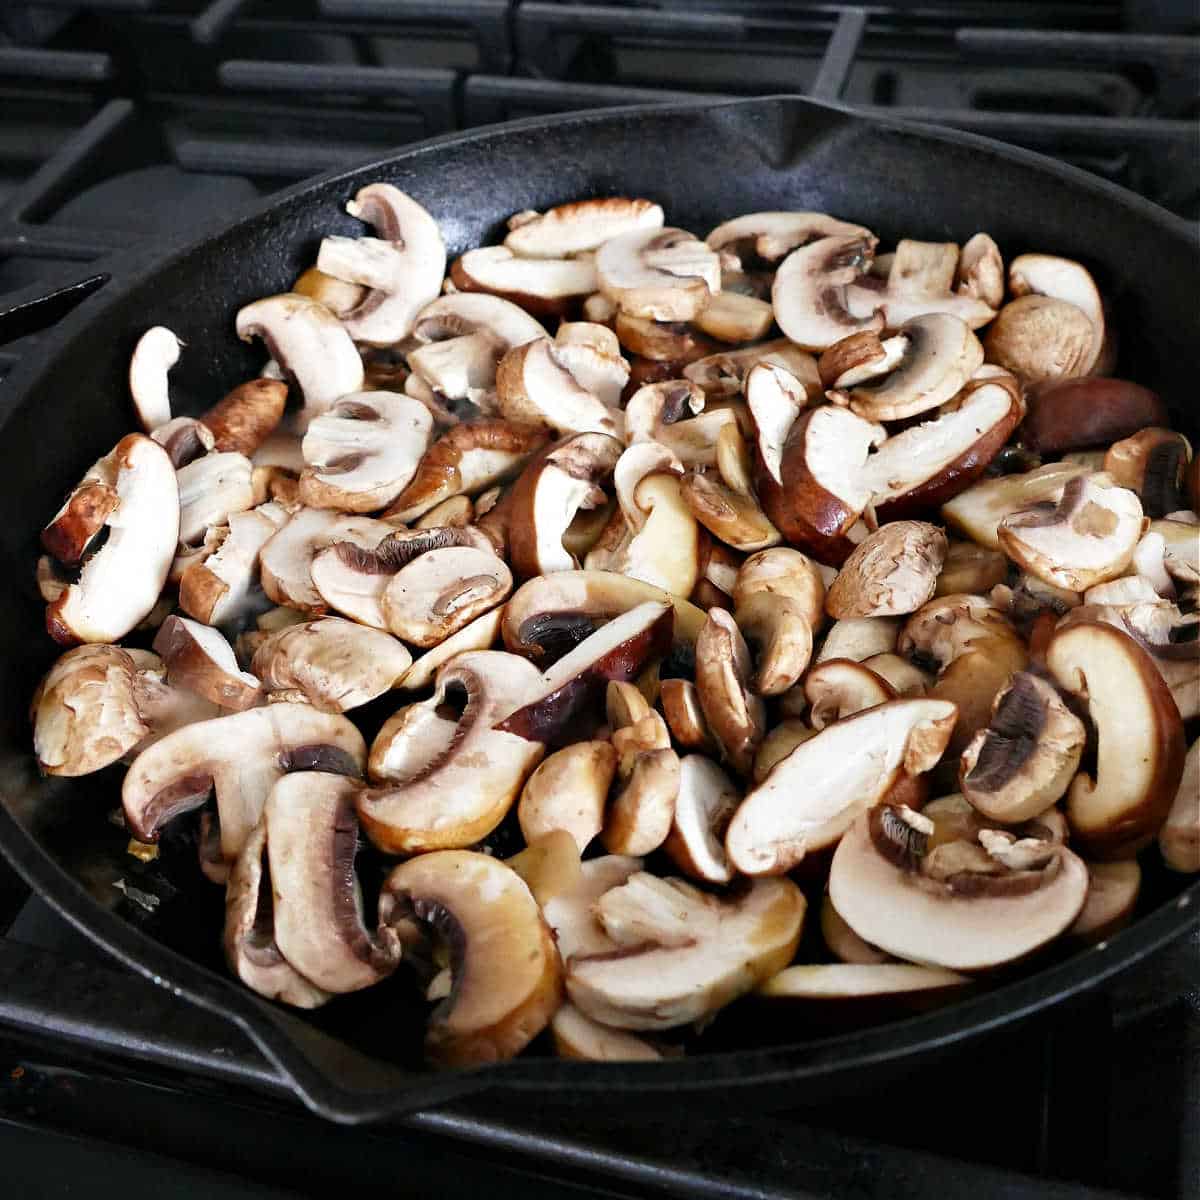 sliced mushrooms cooking in a cast iron skillet on a stove